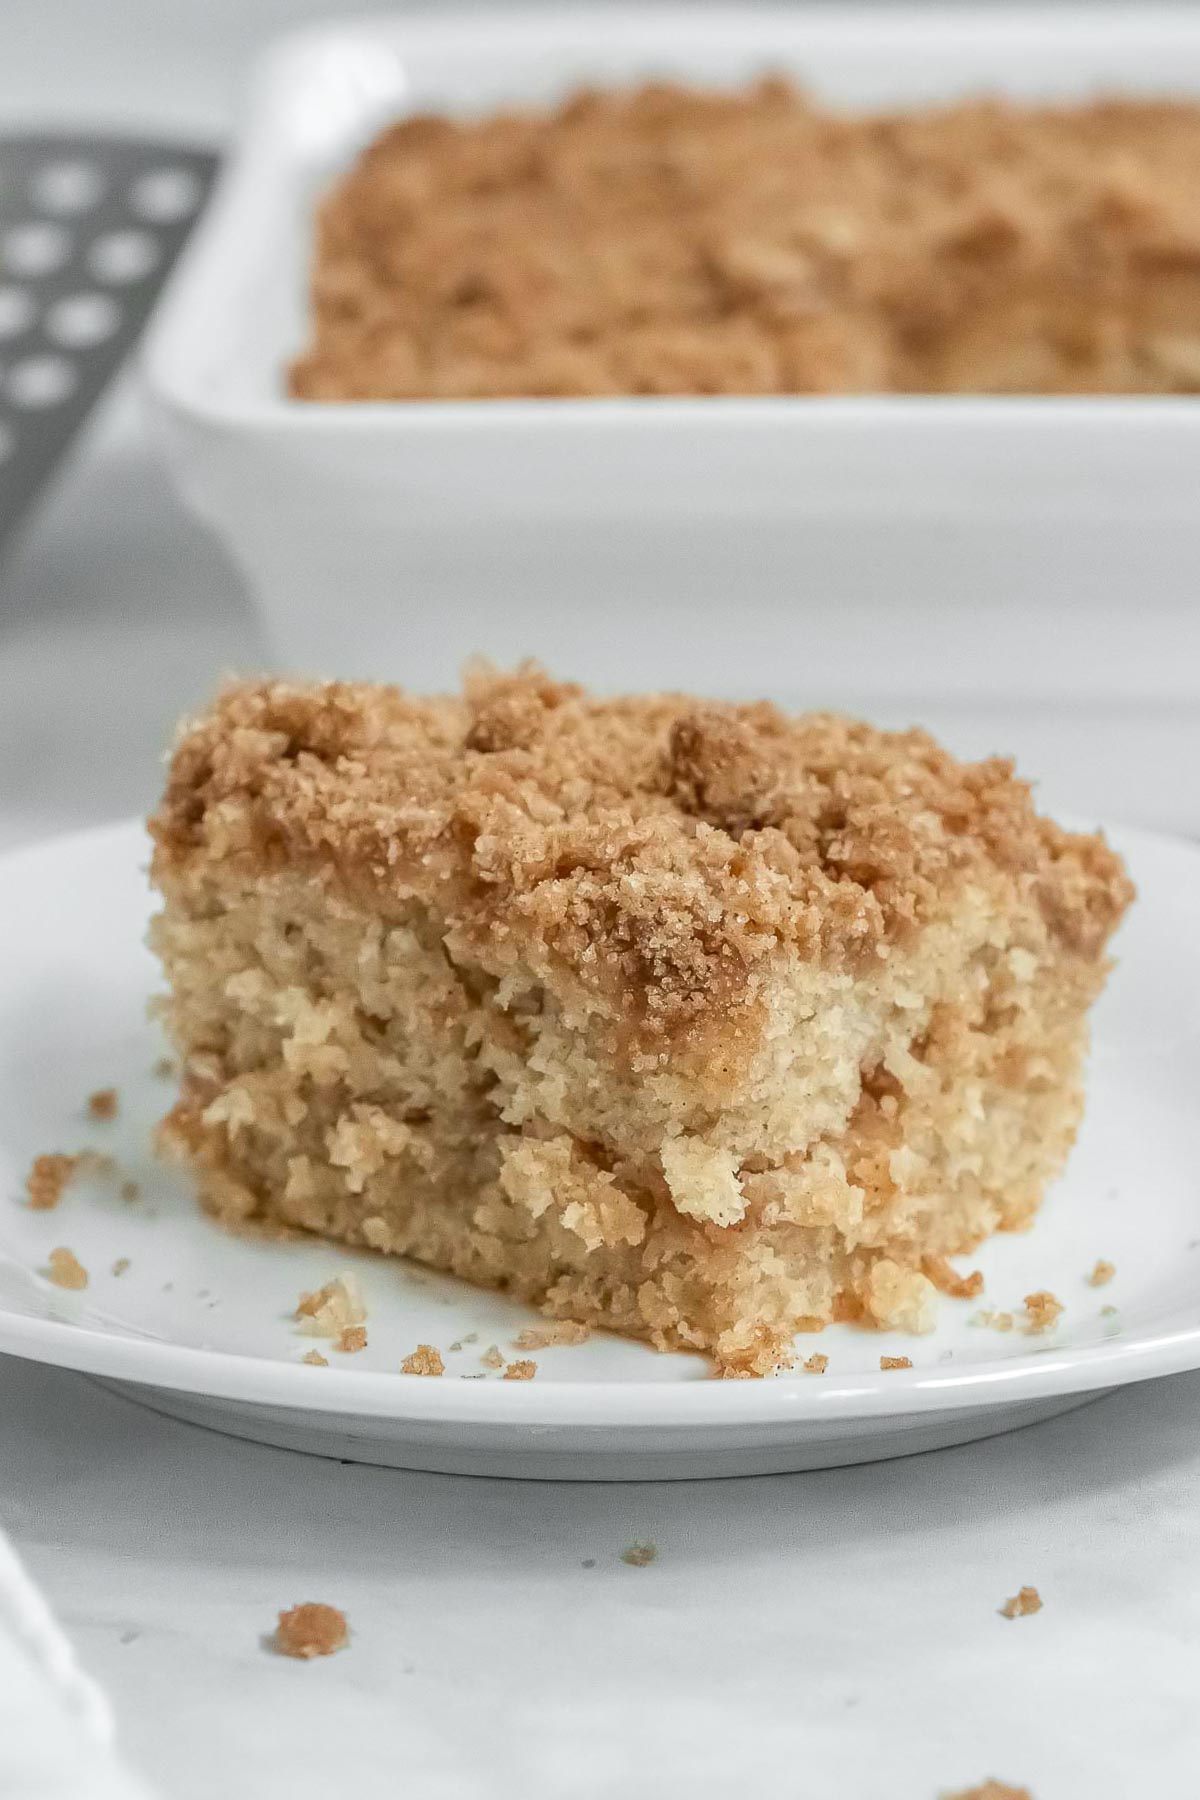 a slice of coffee cake with streusel topping on a white plate with the white baking dish in the background